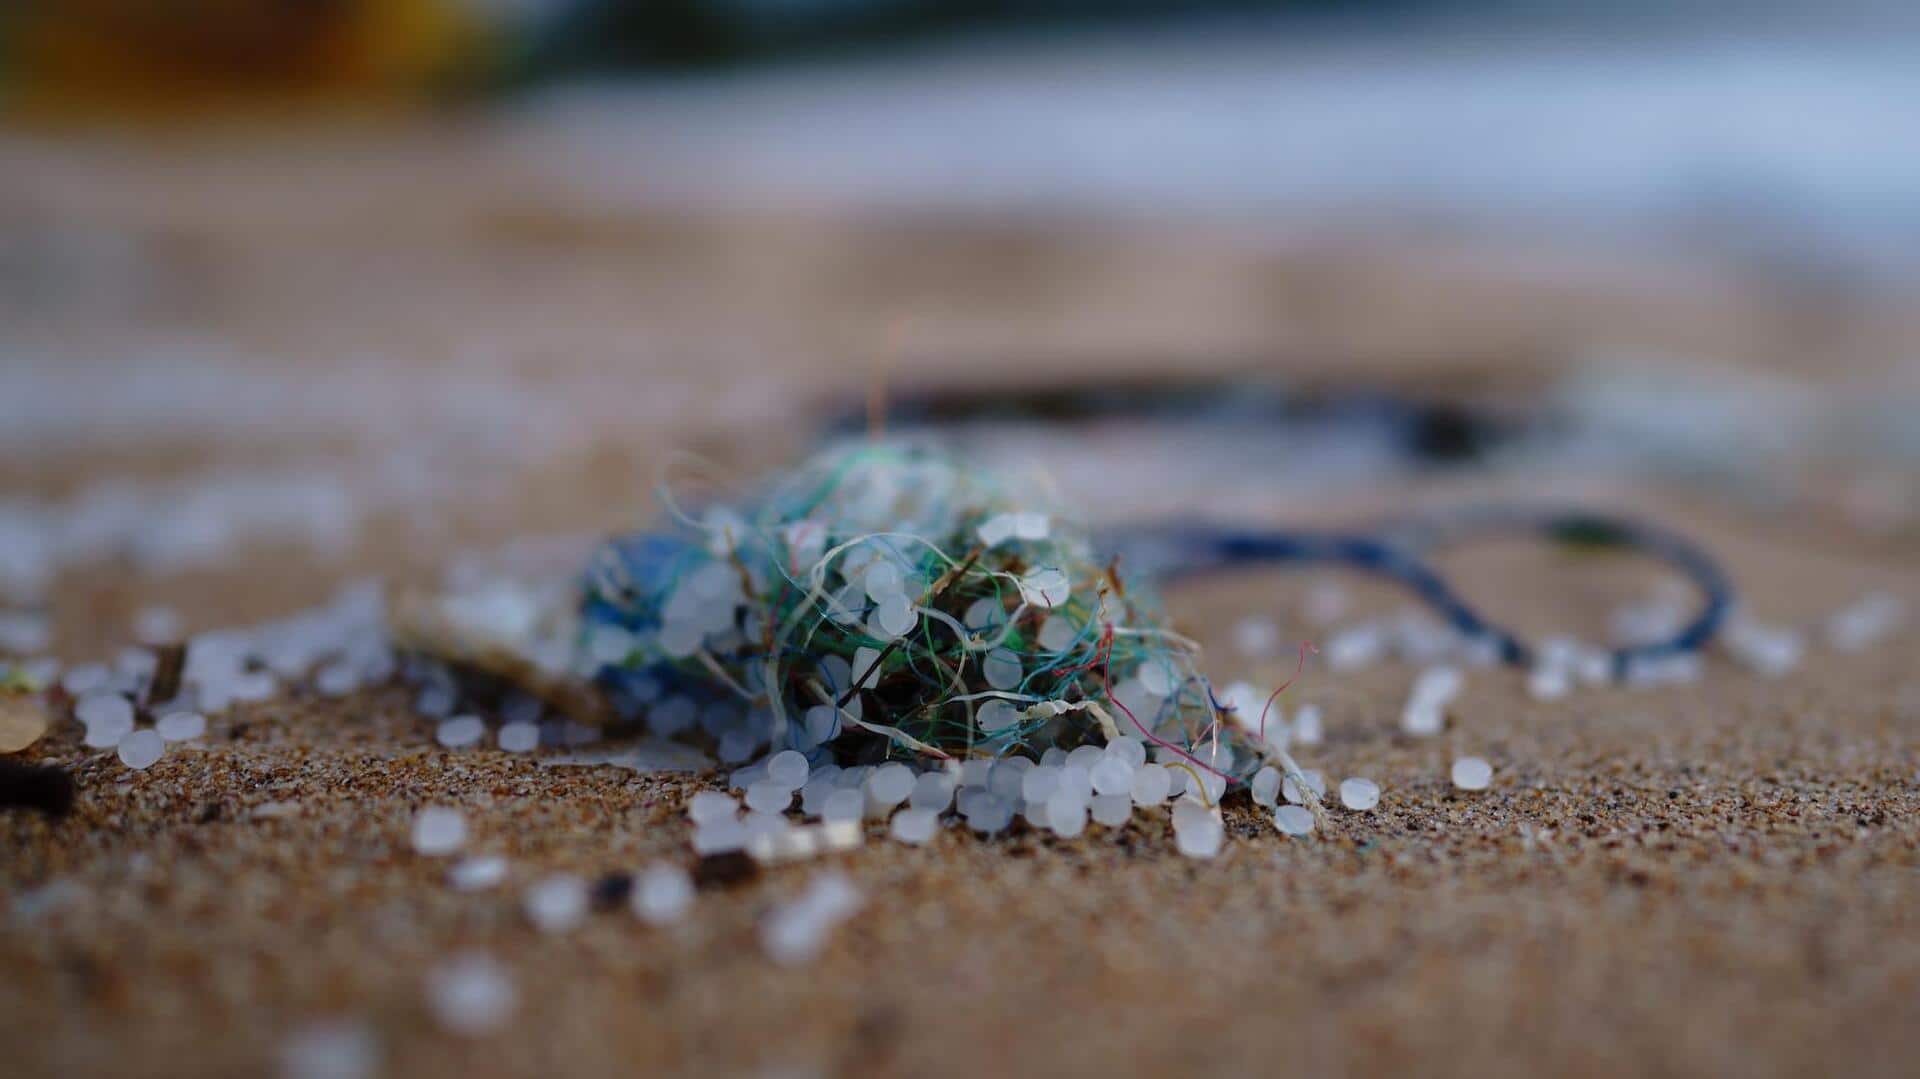 Microplastics have potential to induce inflammation in human brain cells